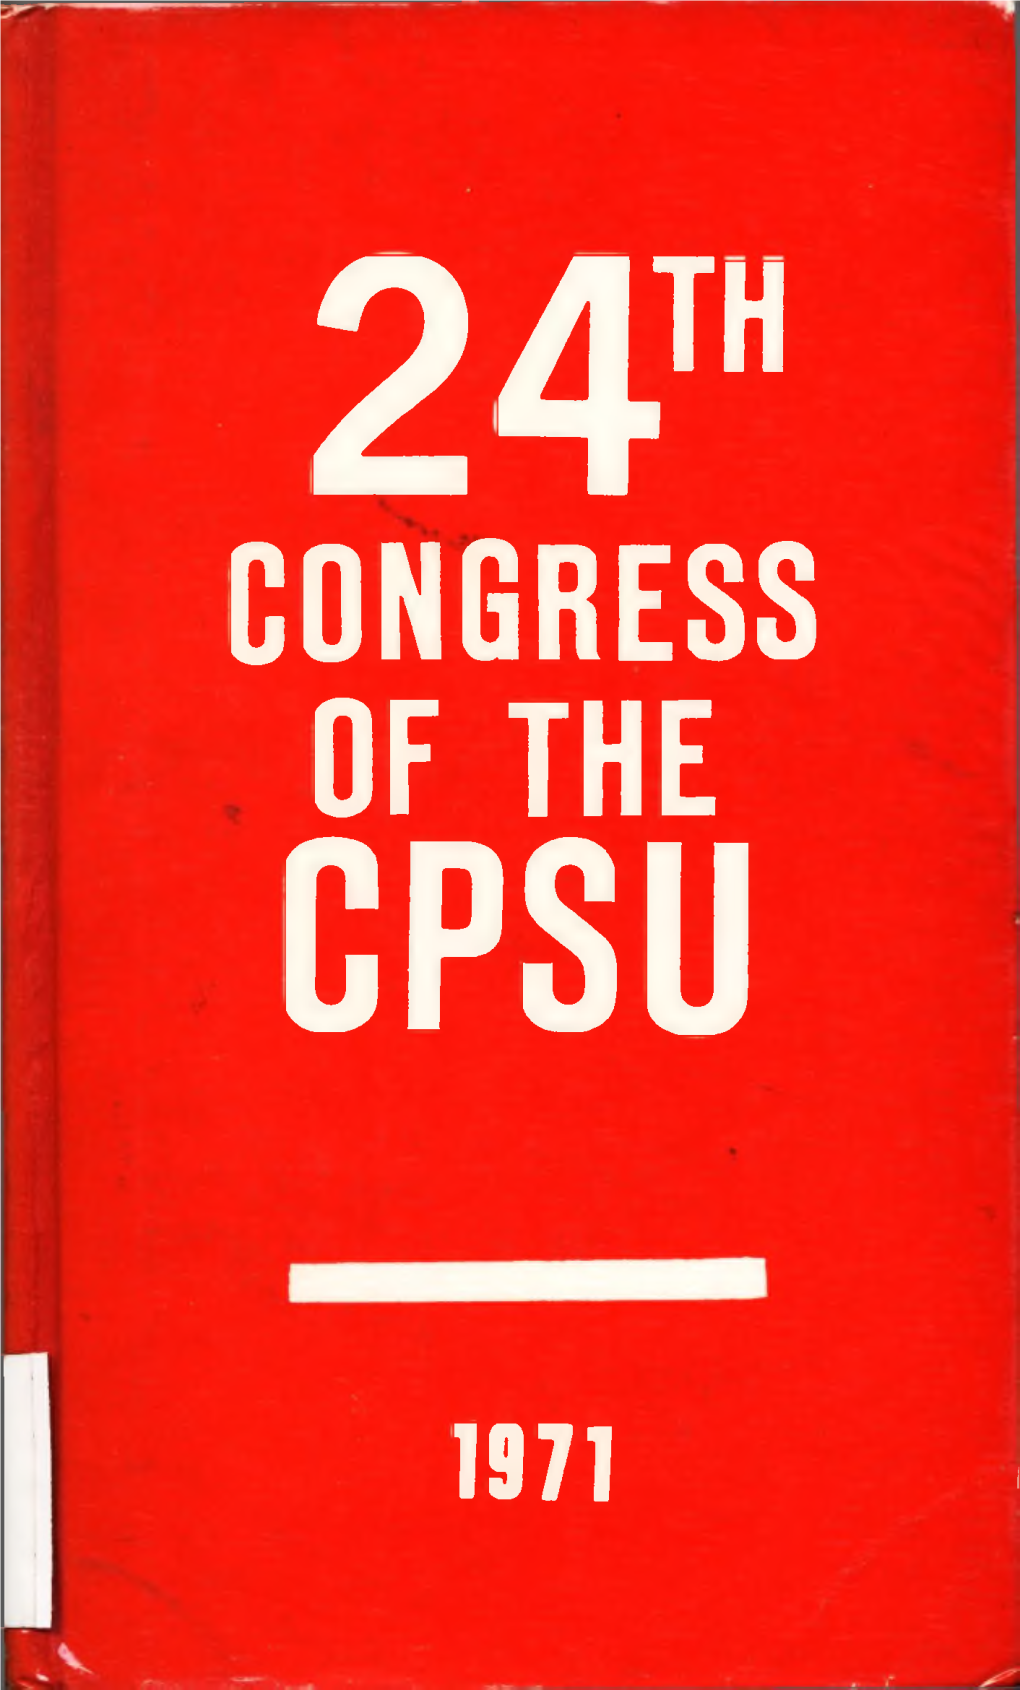 Documents from the 24Th Congress of the CPSU